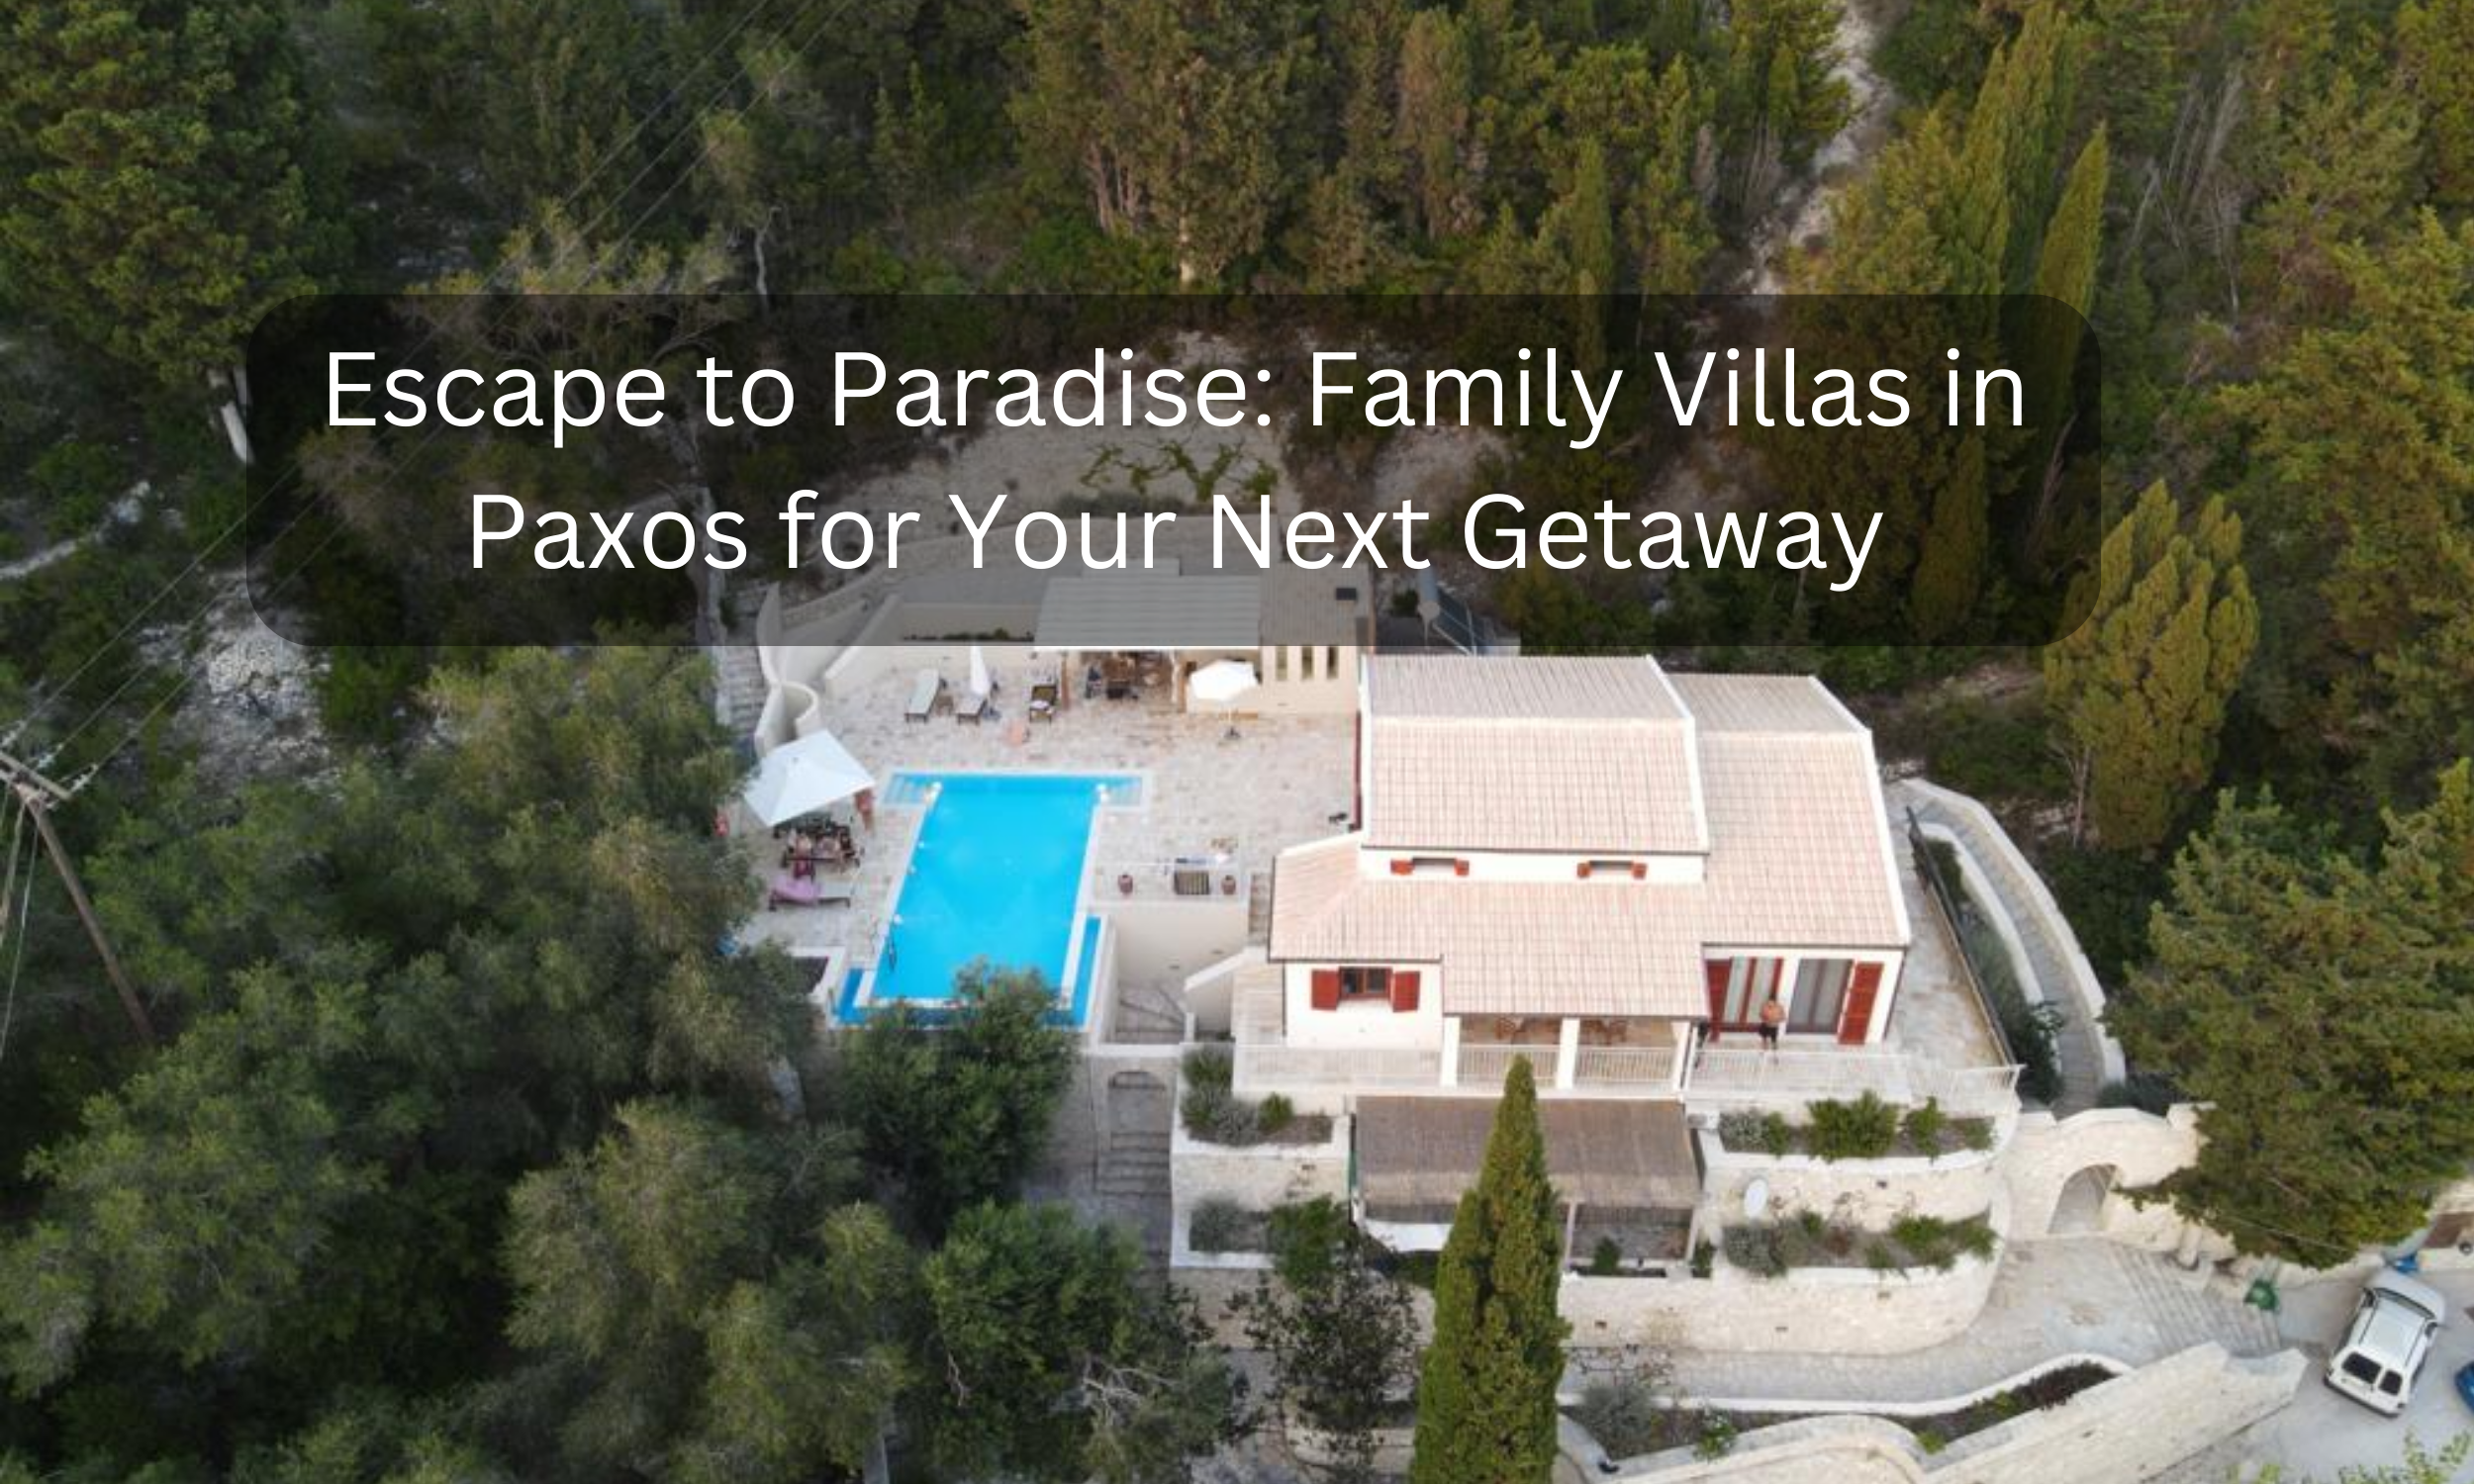 Escape to Paradise: Family Villas in Paxos for Your Next Getaway